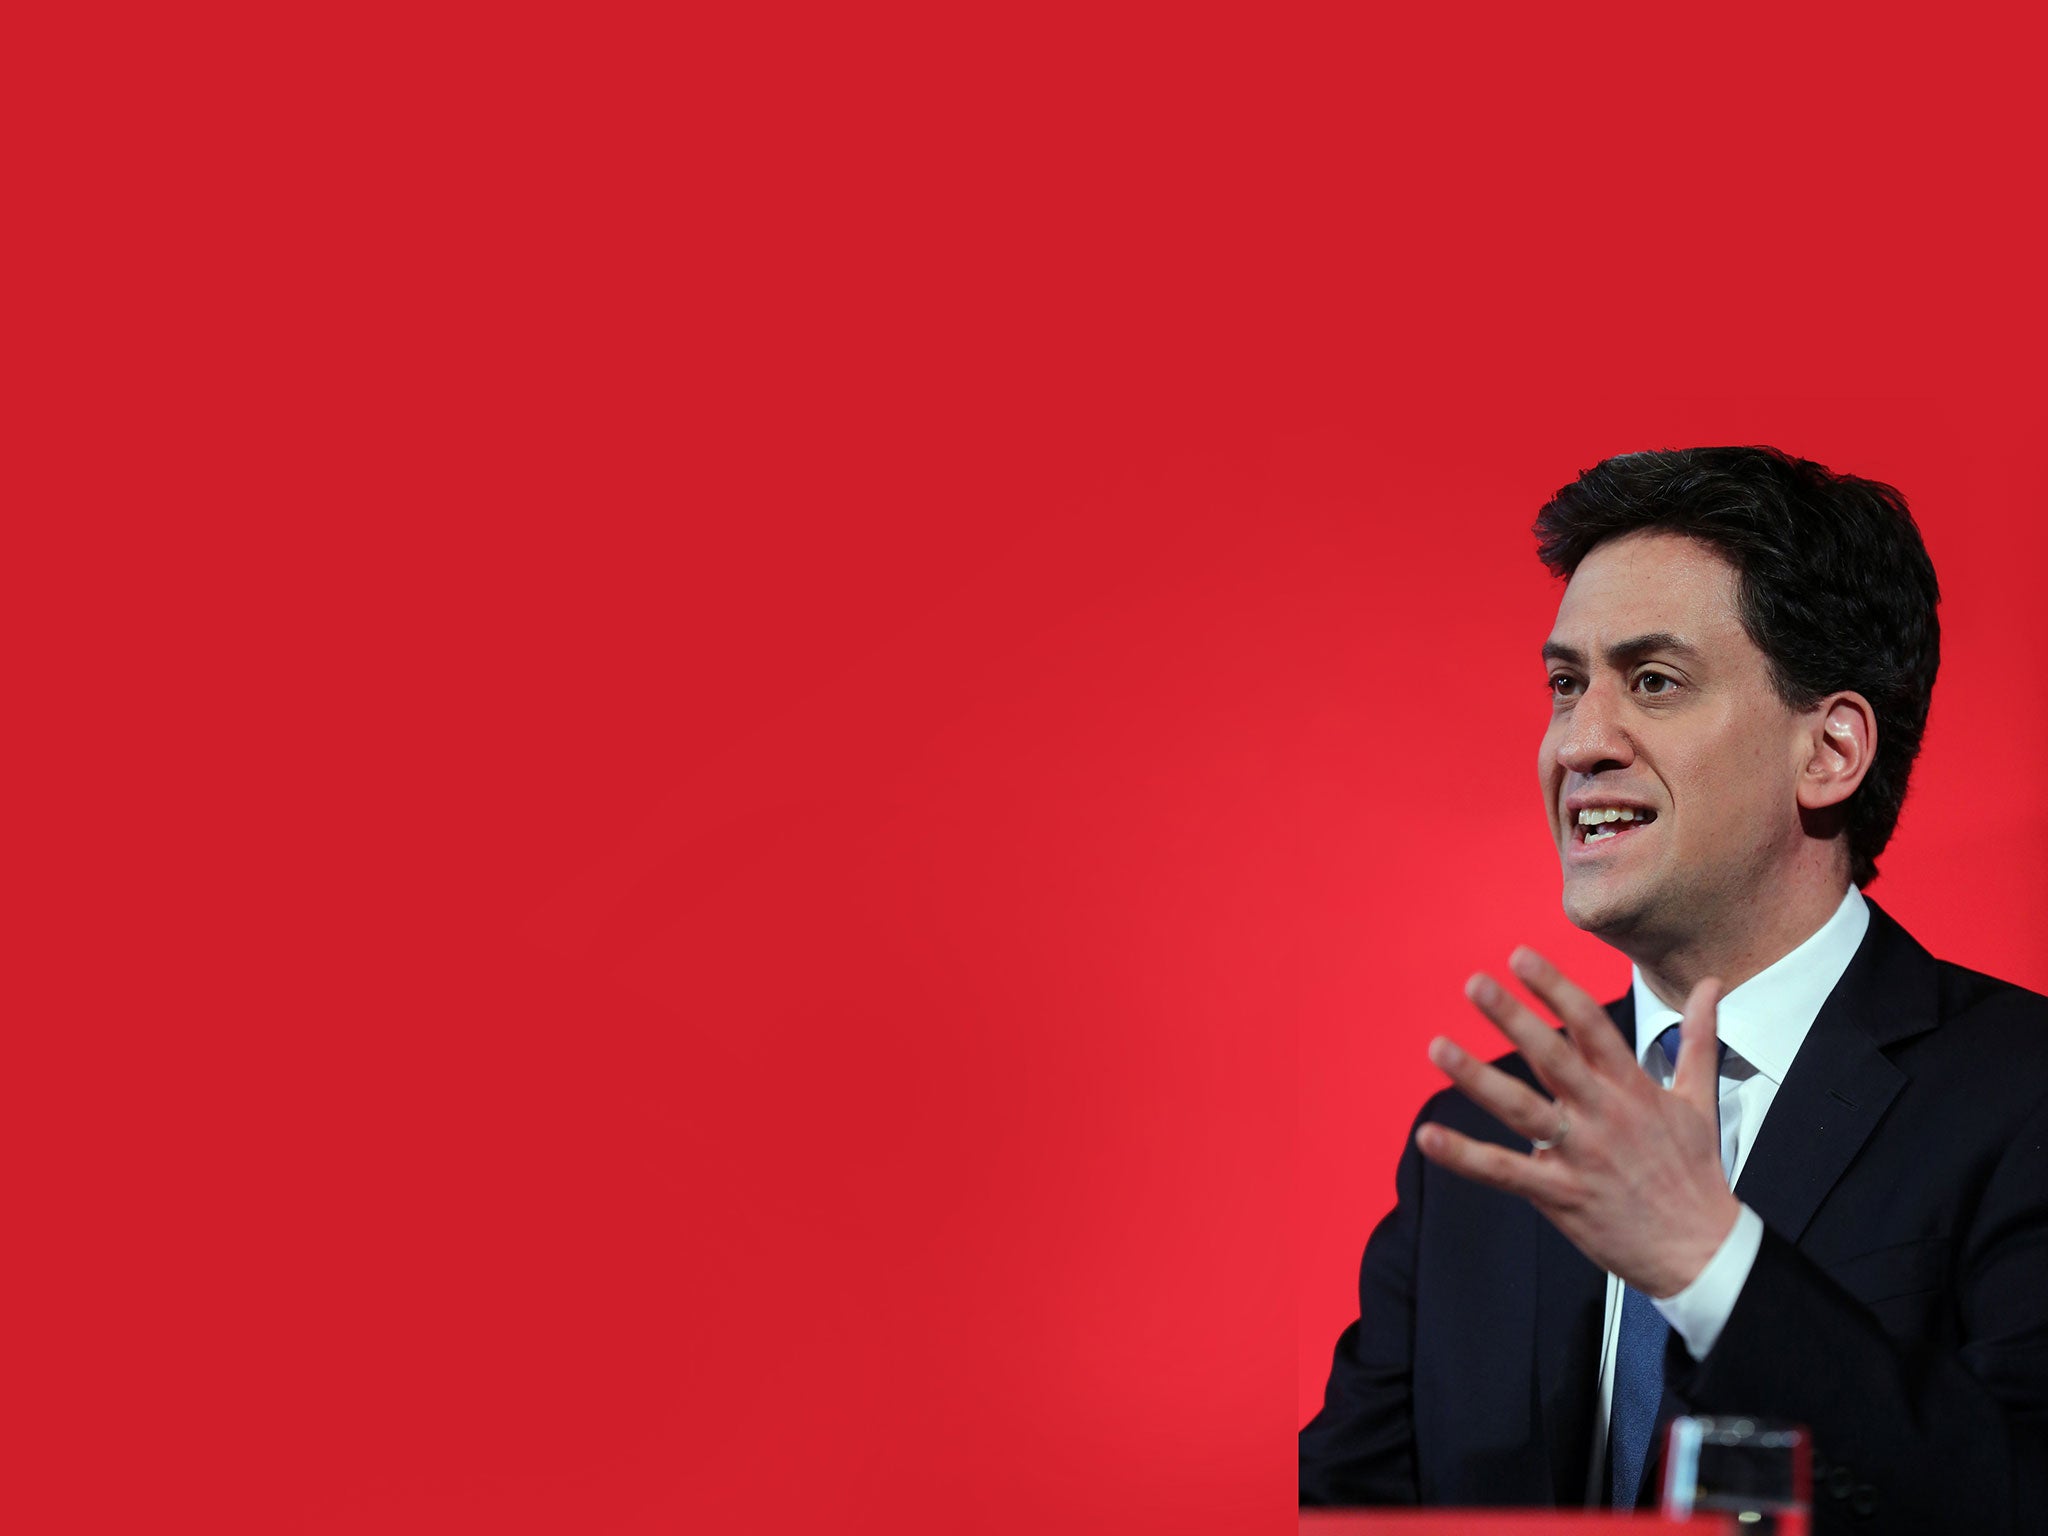 Ed Miliband is set to promise to put economic credibility at the heart of Labour’s programme for government as tensions rise in the closest general election campaign in a generation